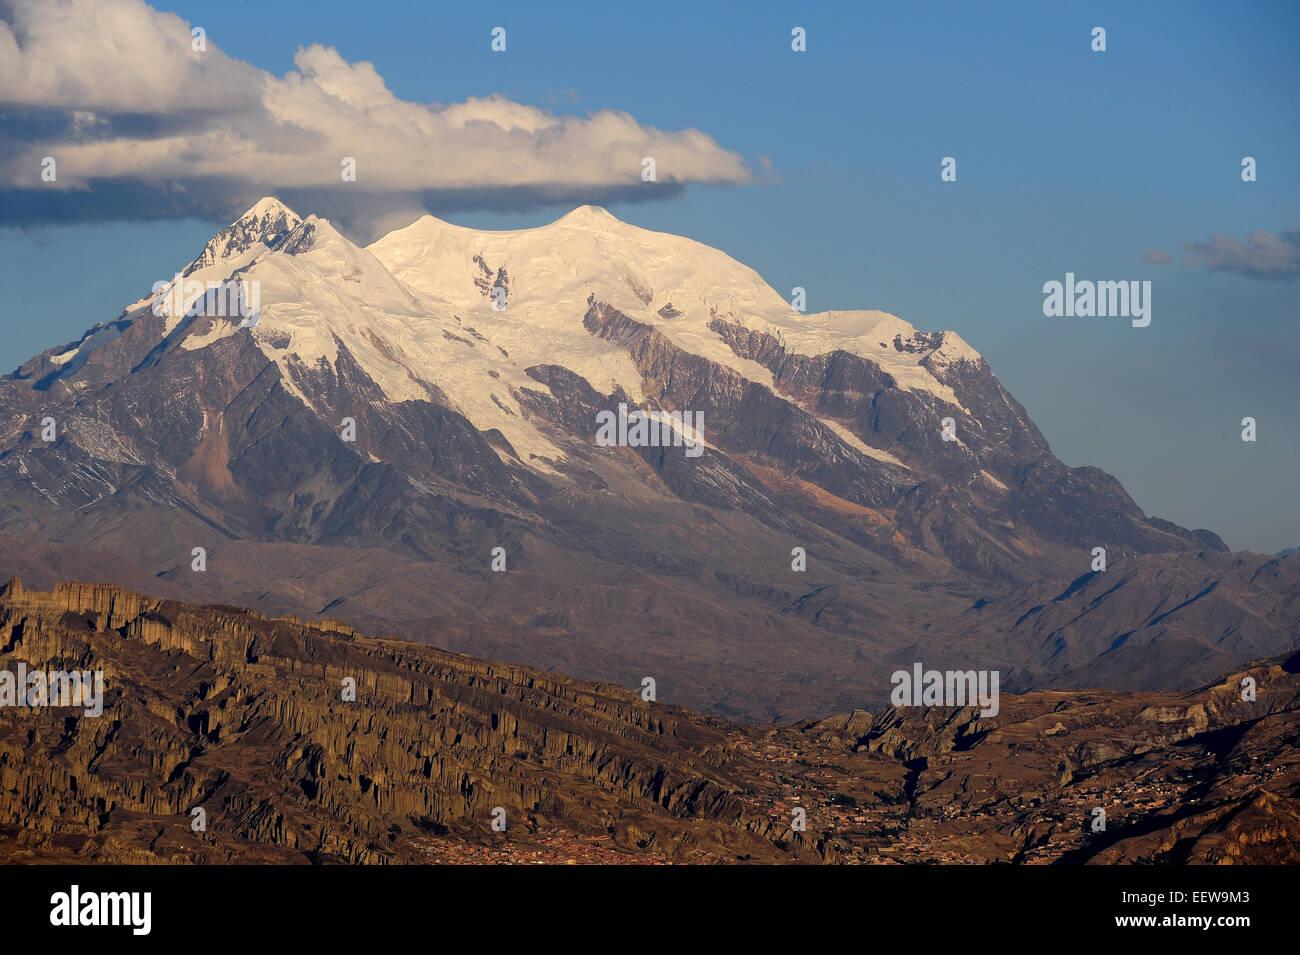 Bolivia's second highest mountain, Illimani Peak, rises to an elevation of 21,117 feet above sea level. (6438m) Stock Photo